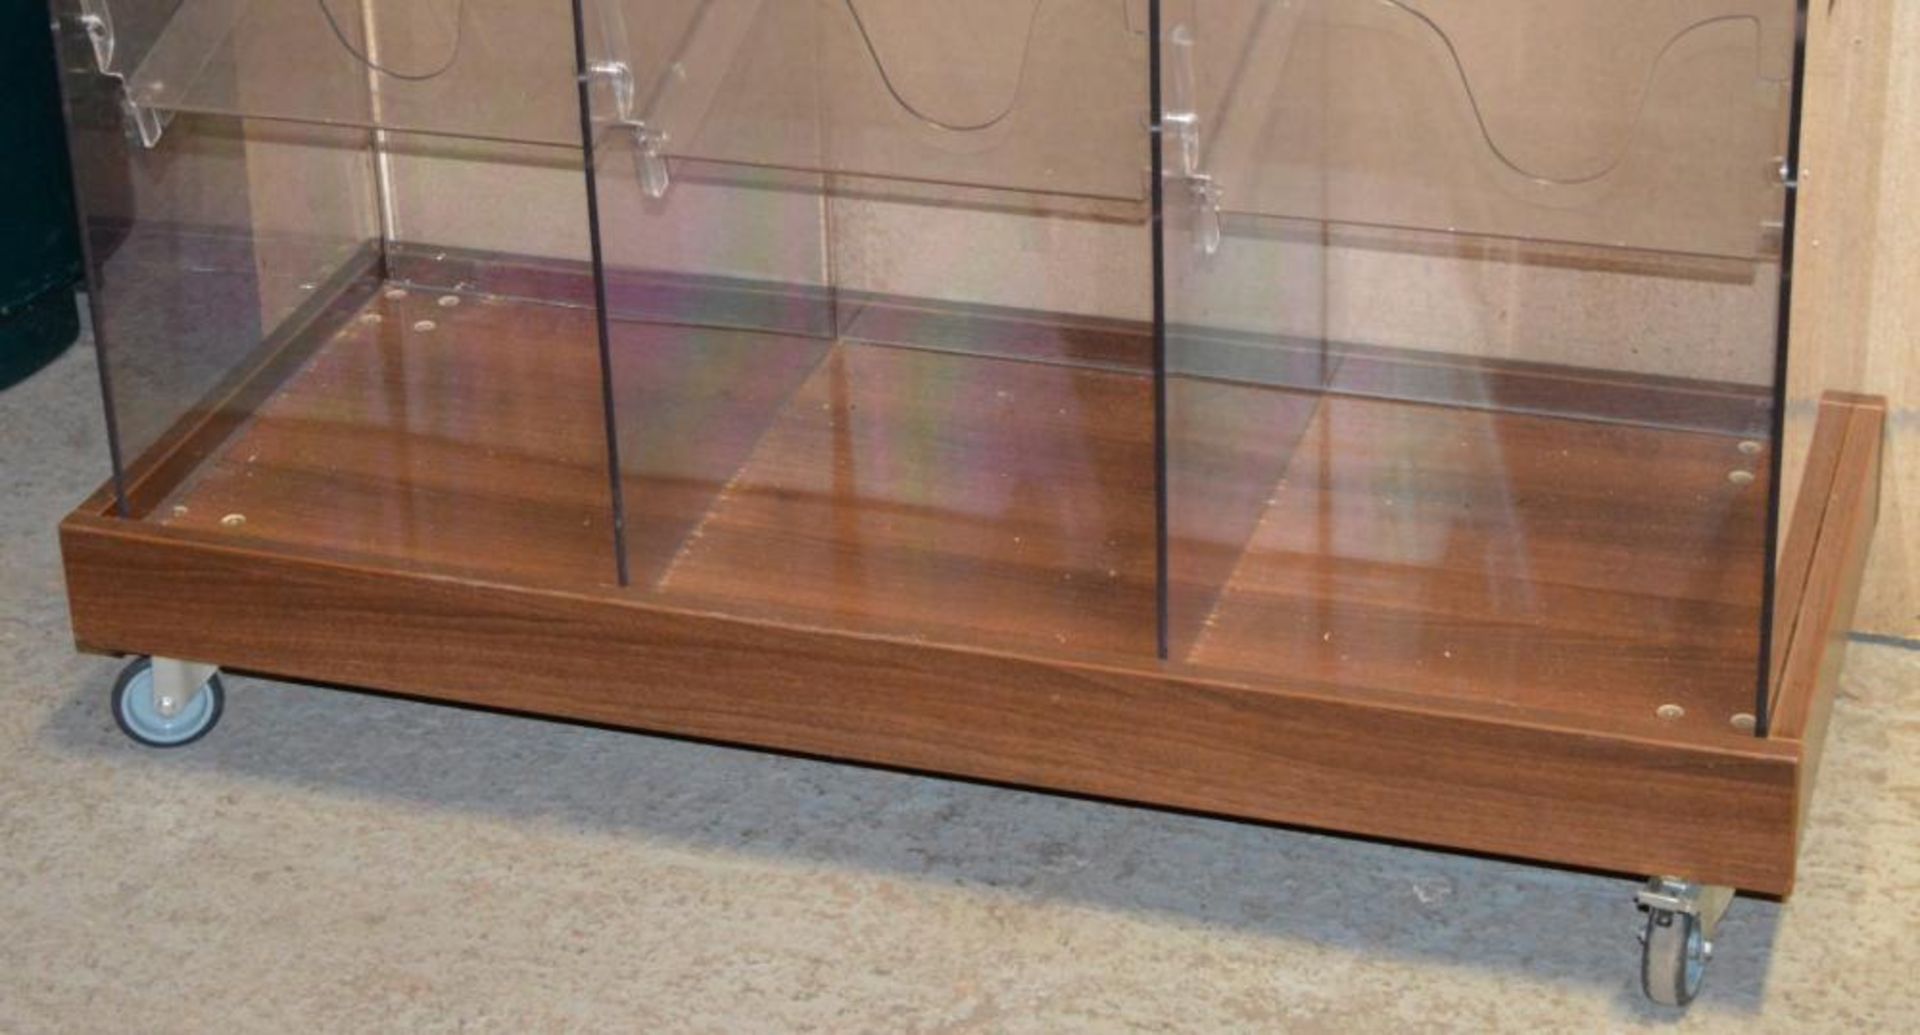 1 x Retail Magazine / Newspaper Display Unit - Clear Perspex With Walnut Base on Castors - H141 x - Image 3 of 6